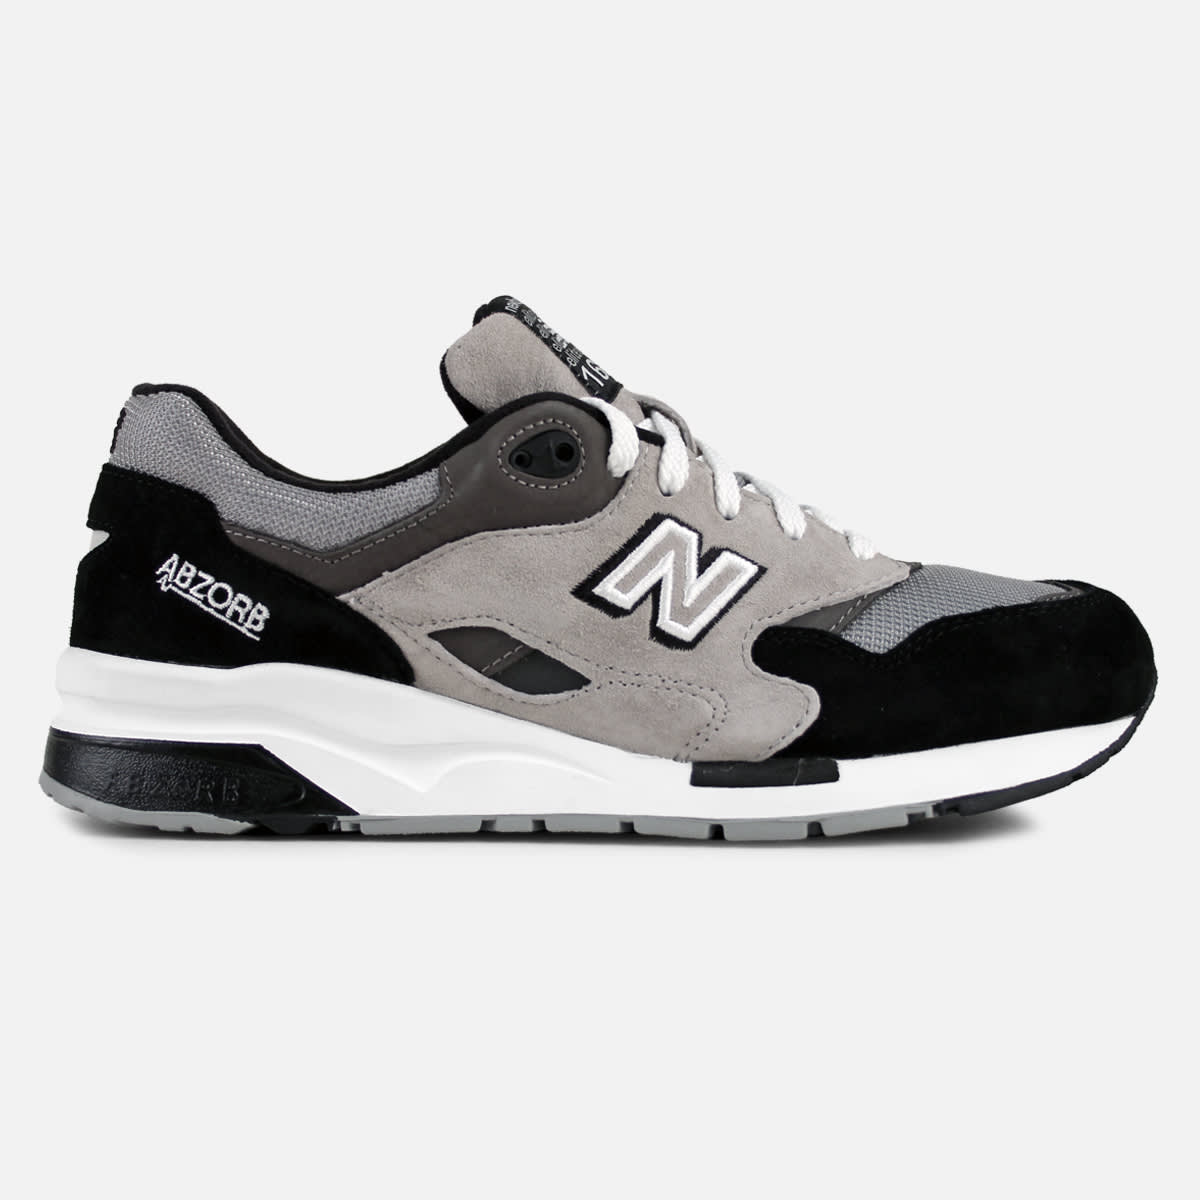 New Balance 1600 | New Balance | Sneaker News, Launches, Release Dates,  Collabs \u0026 Info